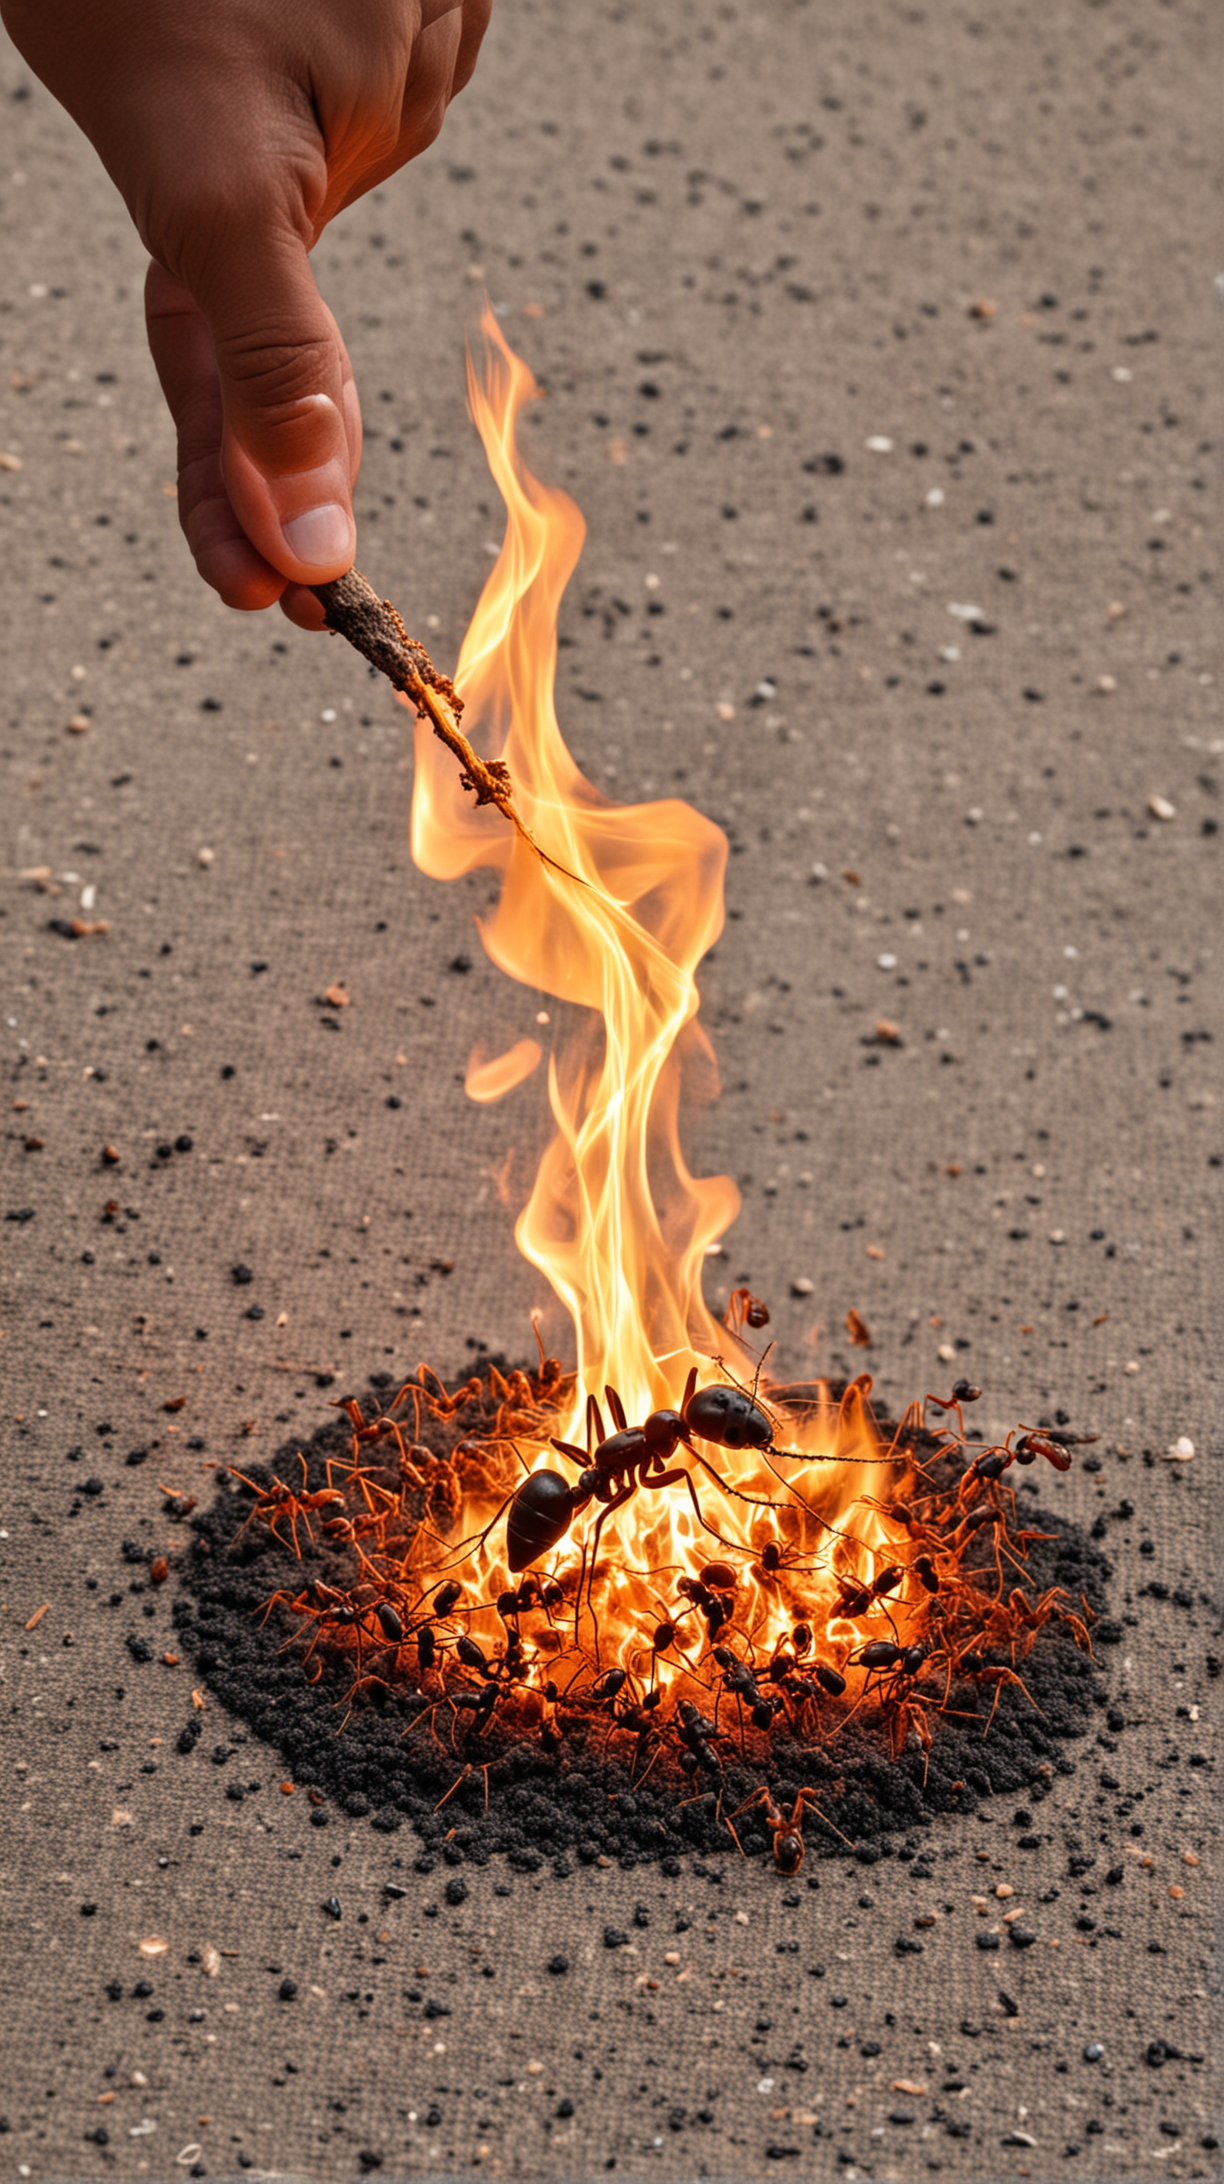 a man burning ant with fire